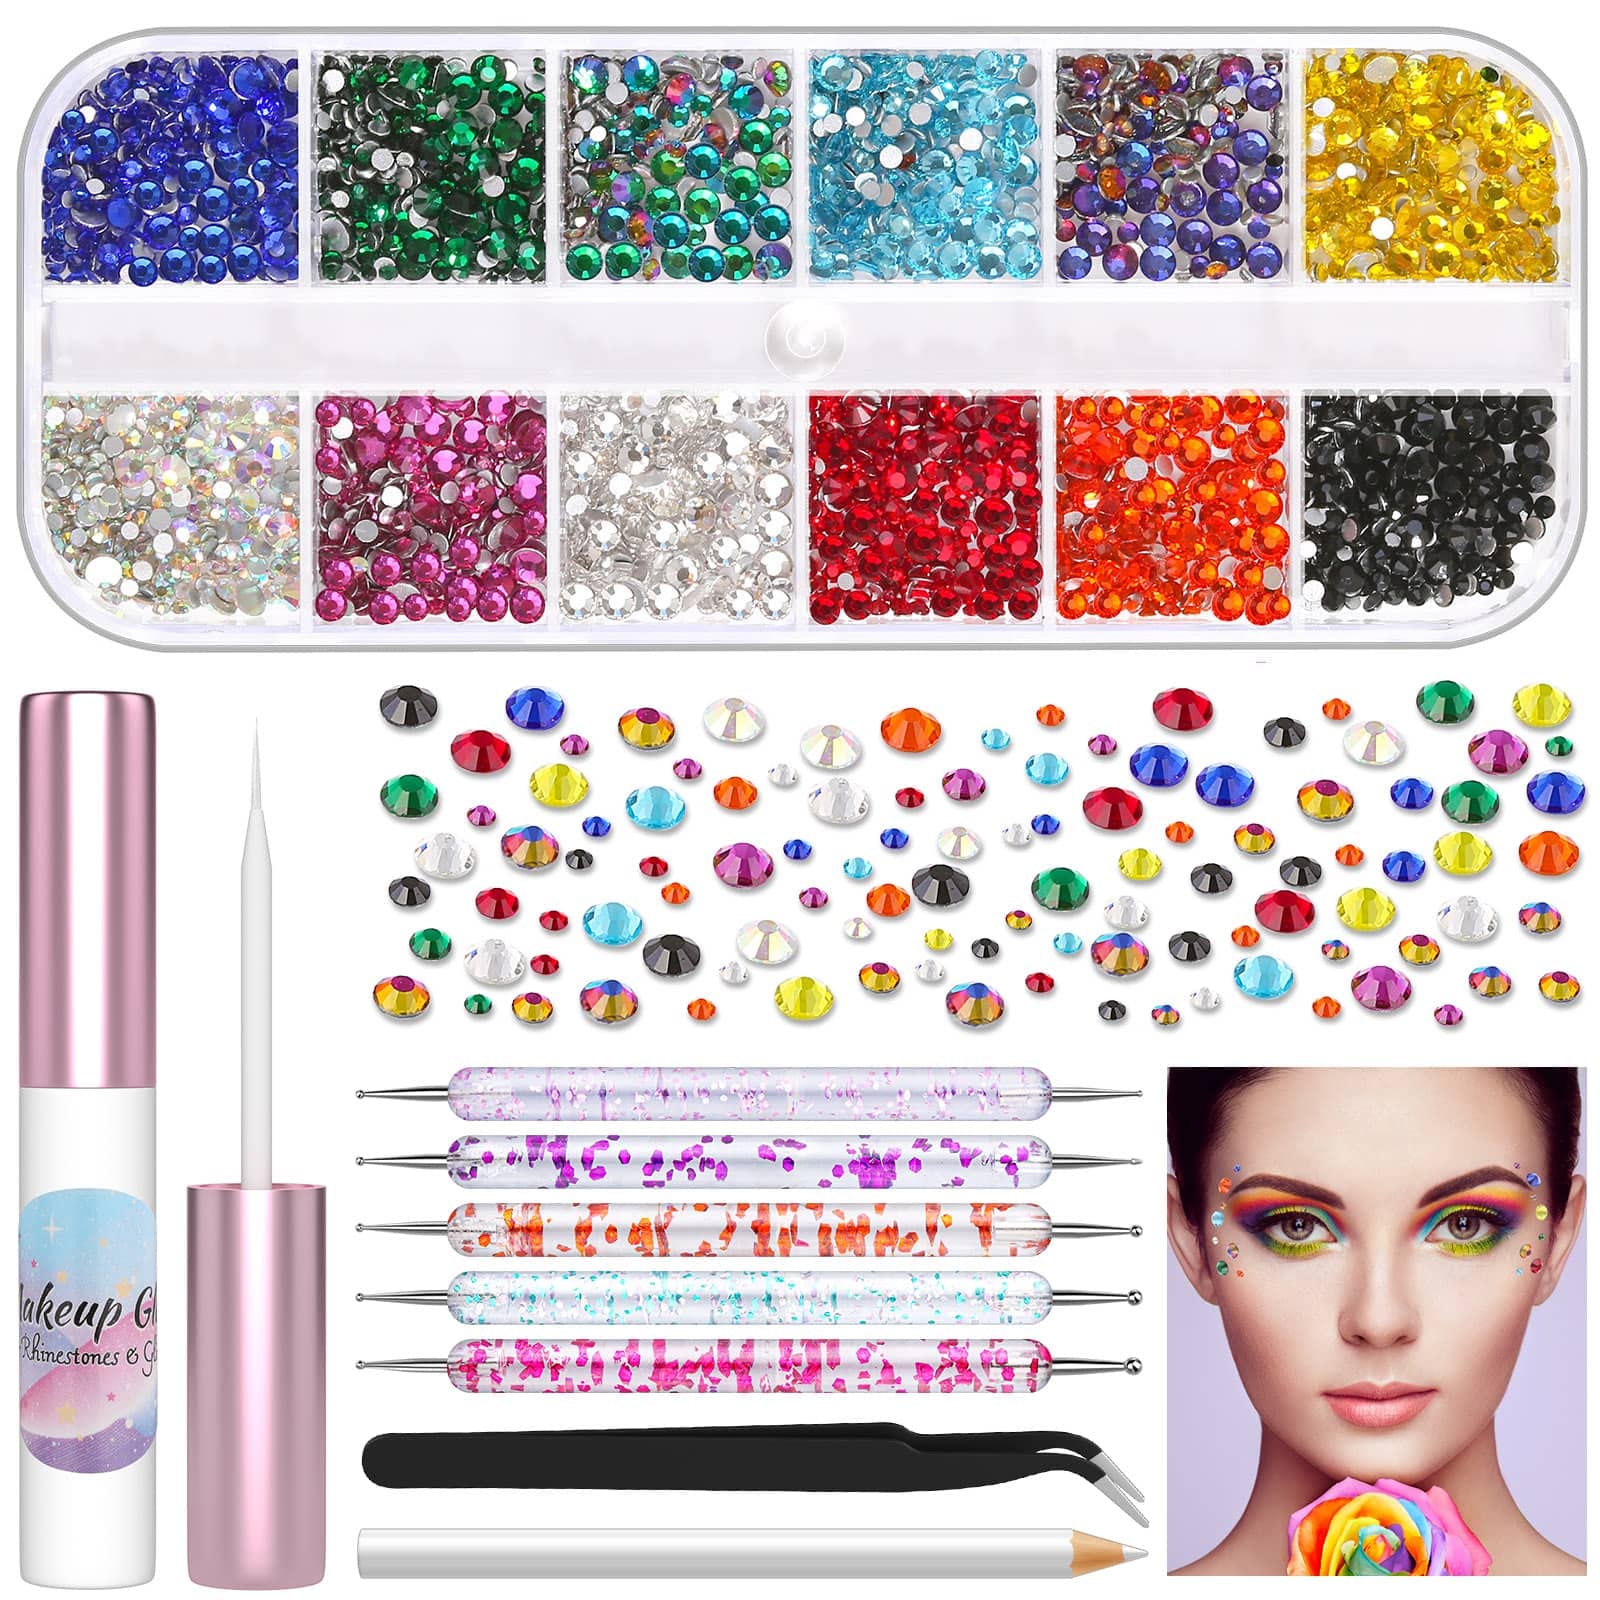 3600Pcs Face Gems Eyes Jewels with Glue for Makeup Rhinestone, Shynek  Flatback Rhinestone Colored Eye Gems Crystal with Tweezers Dotting Tools for  Nail Art Body Hair Eye Makeup Crafts Decoration A.multicolor